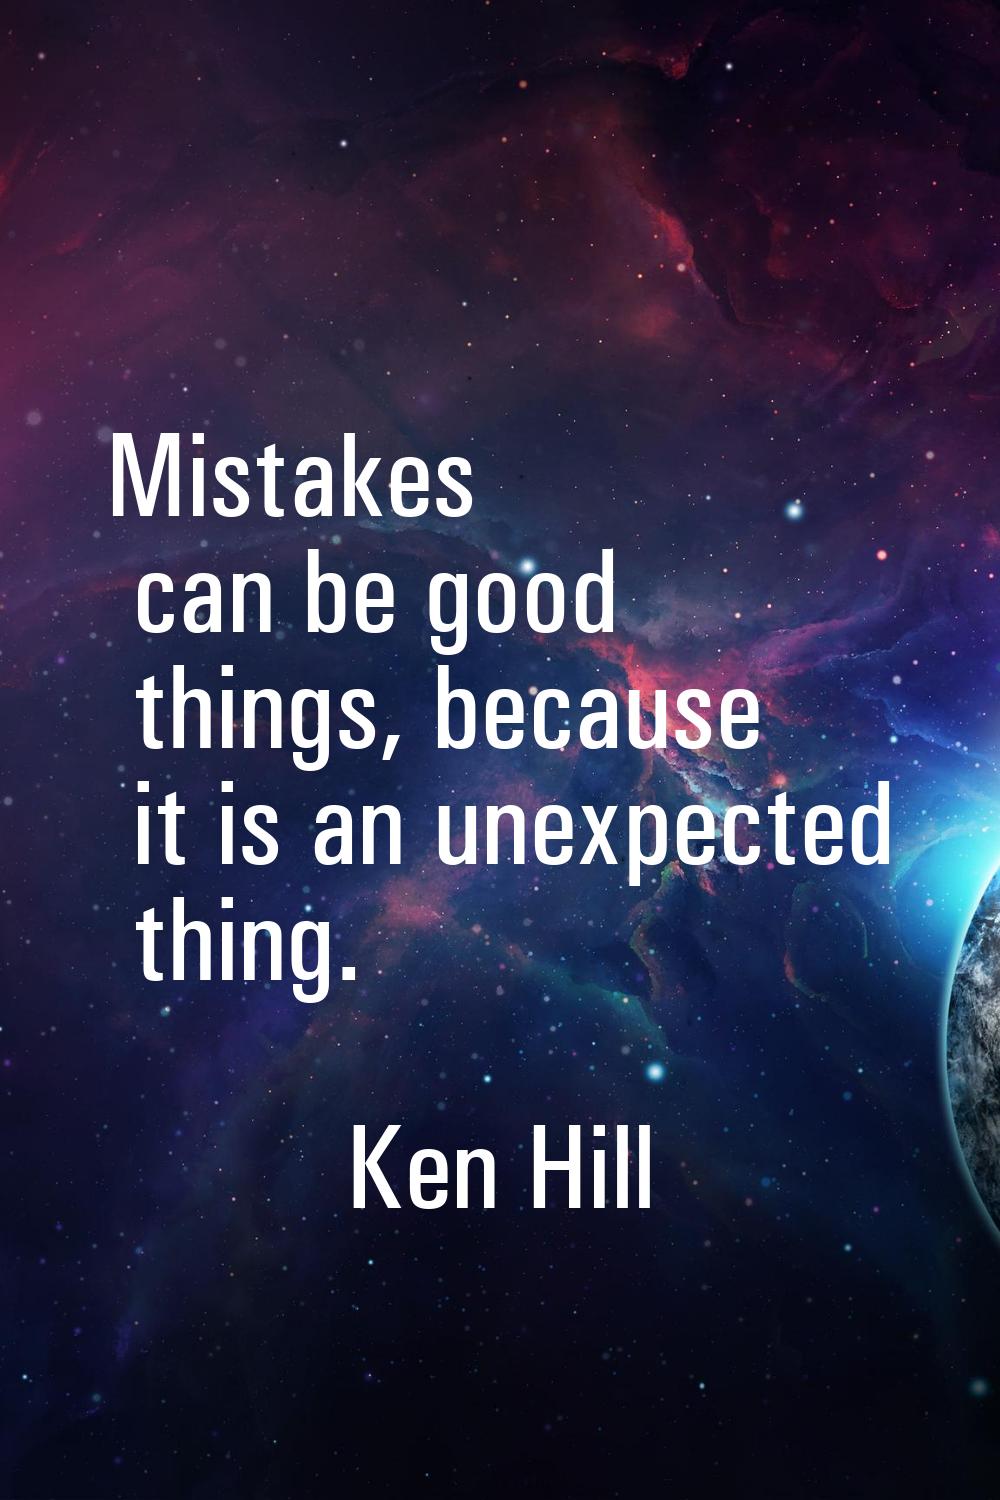 Mistakes can be good things, because it is an unexpected thing.